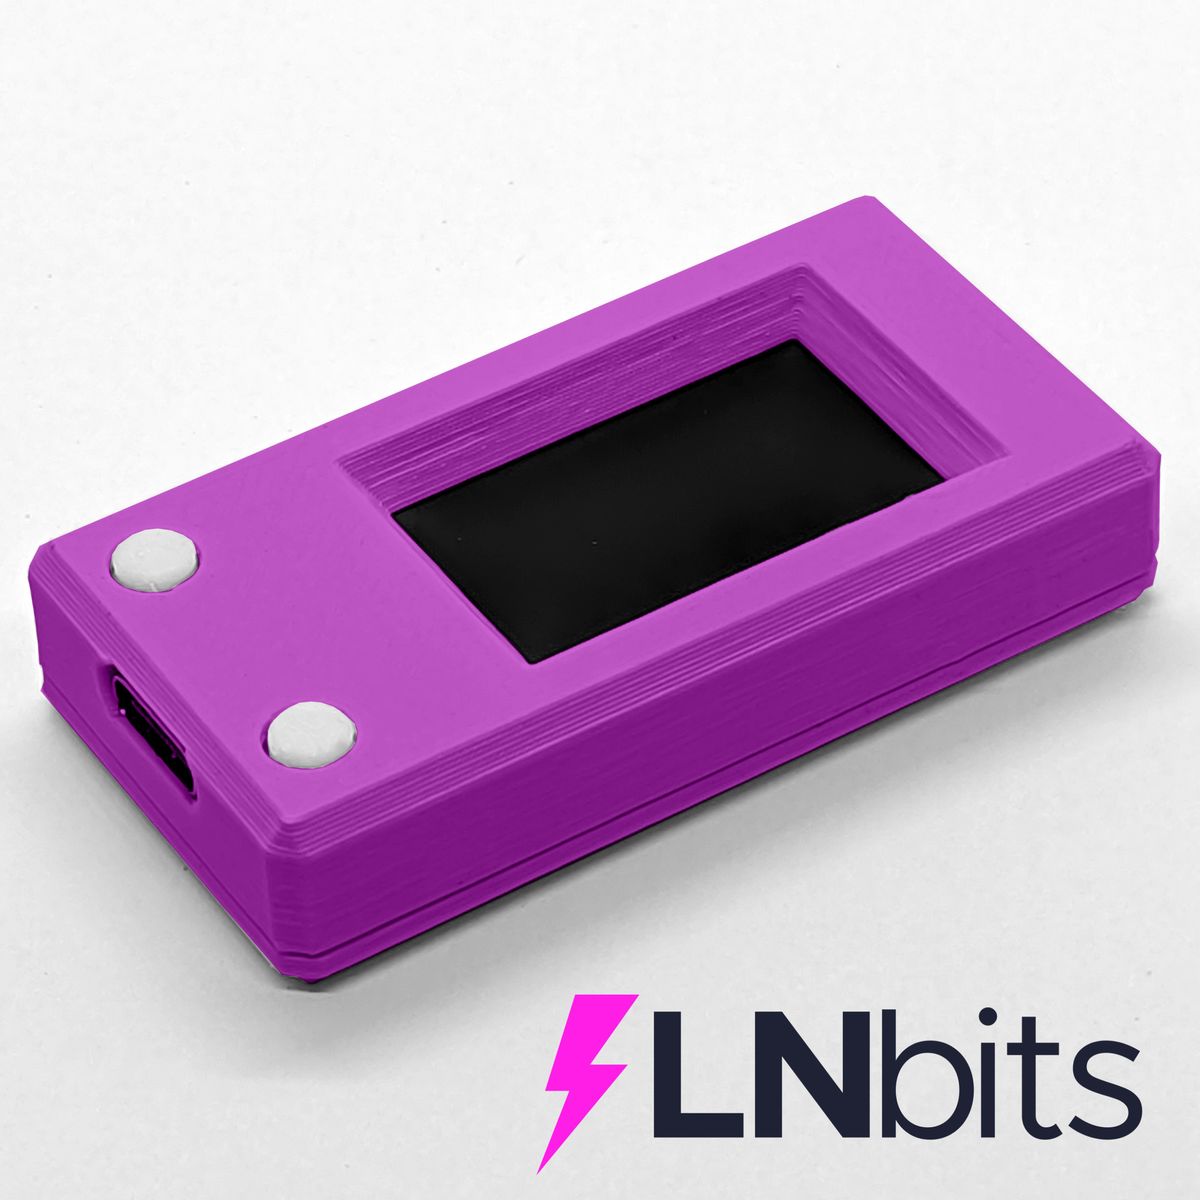 Nostr DIY Signing Device Launched by LNBits